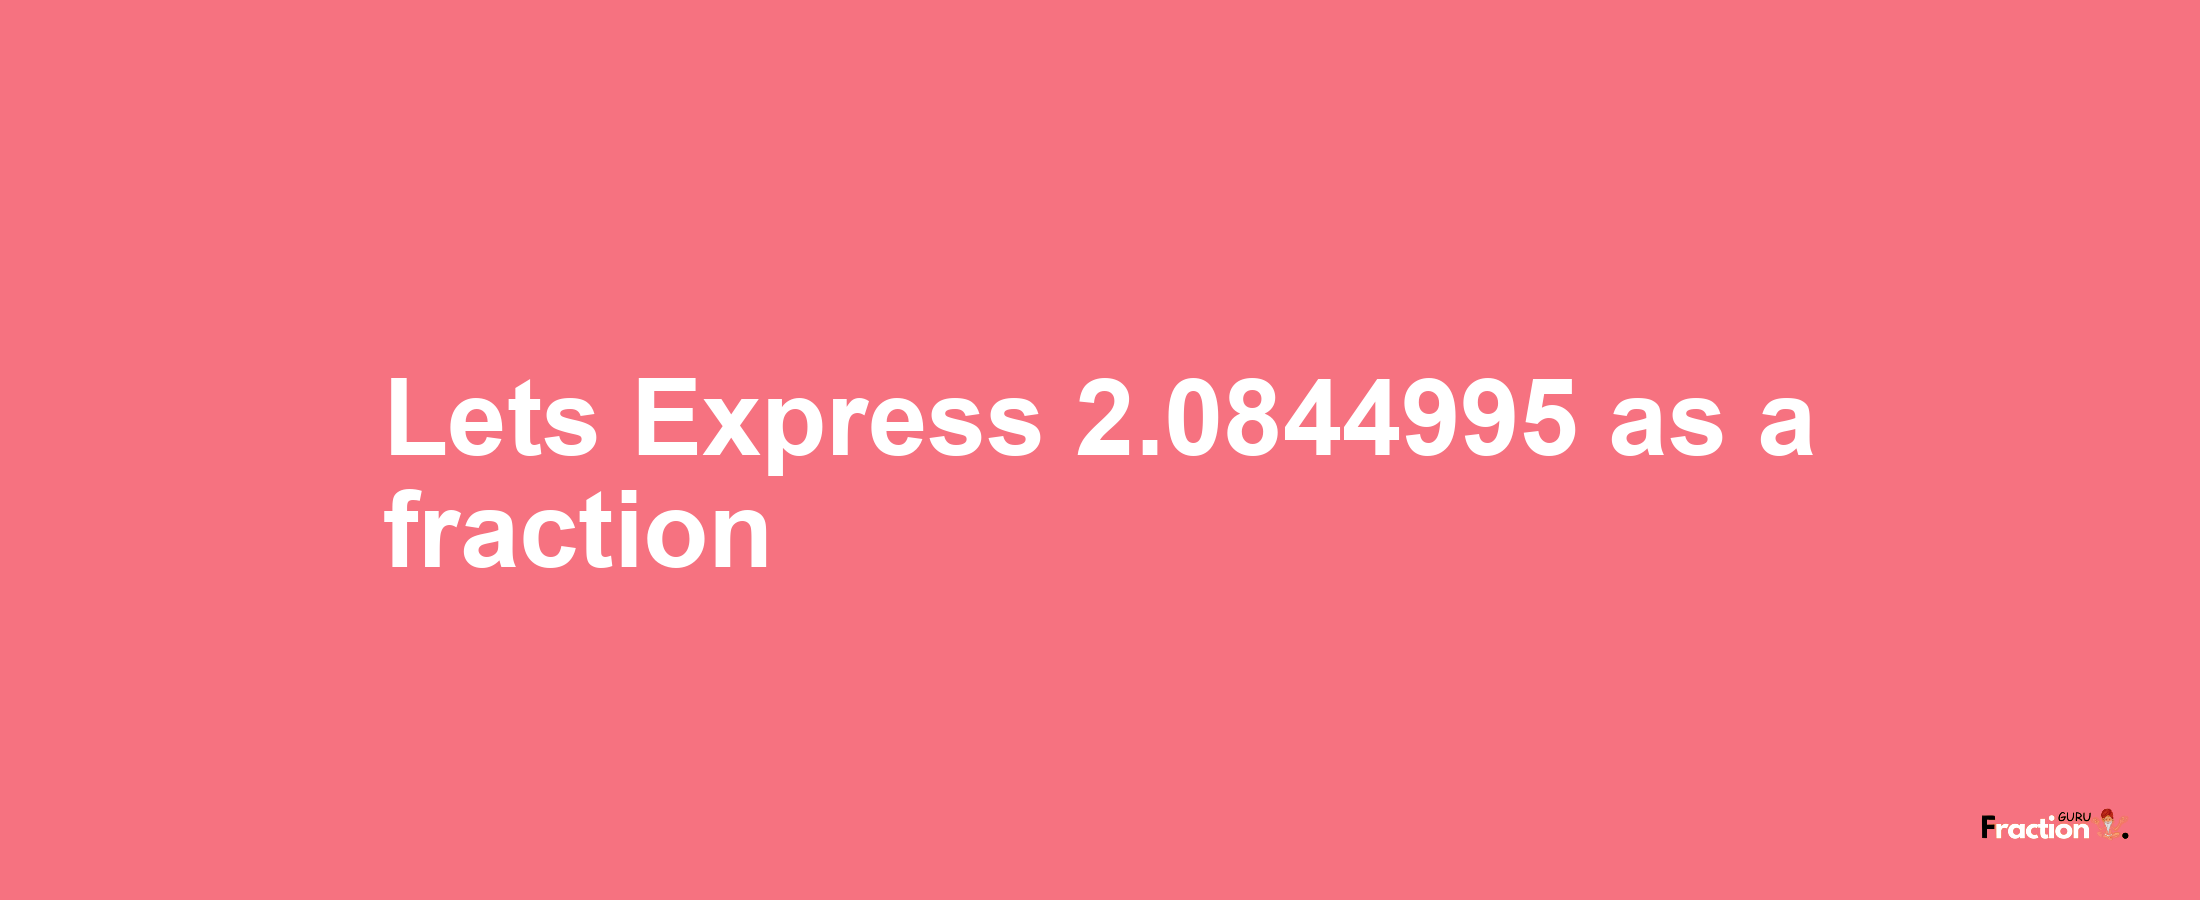 Lets Express 2.0844995 as afraction